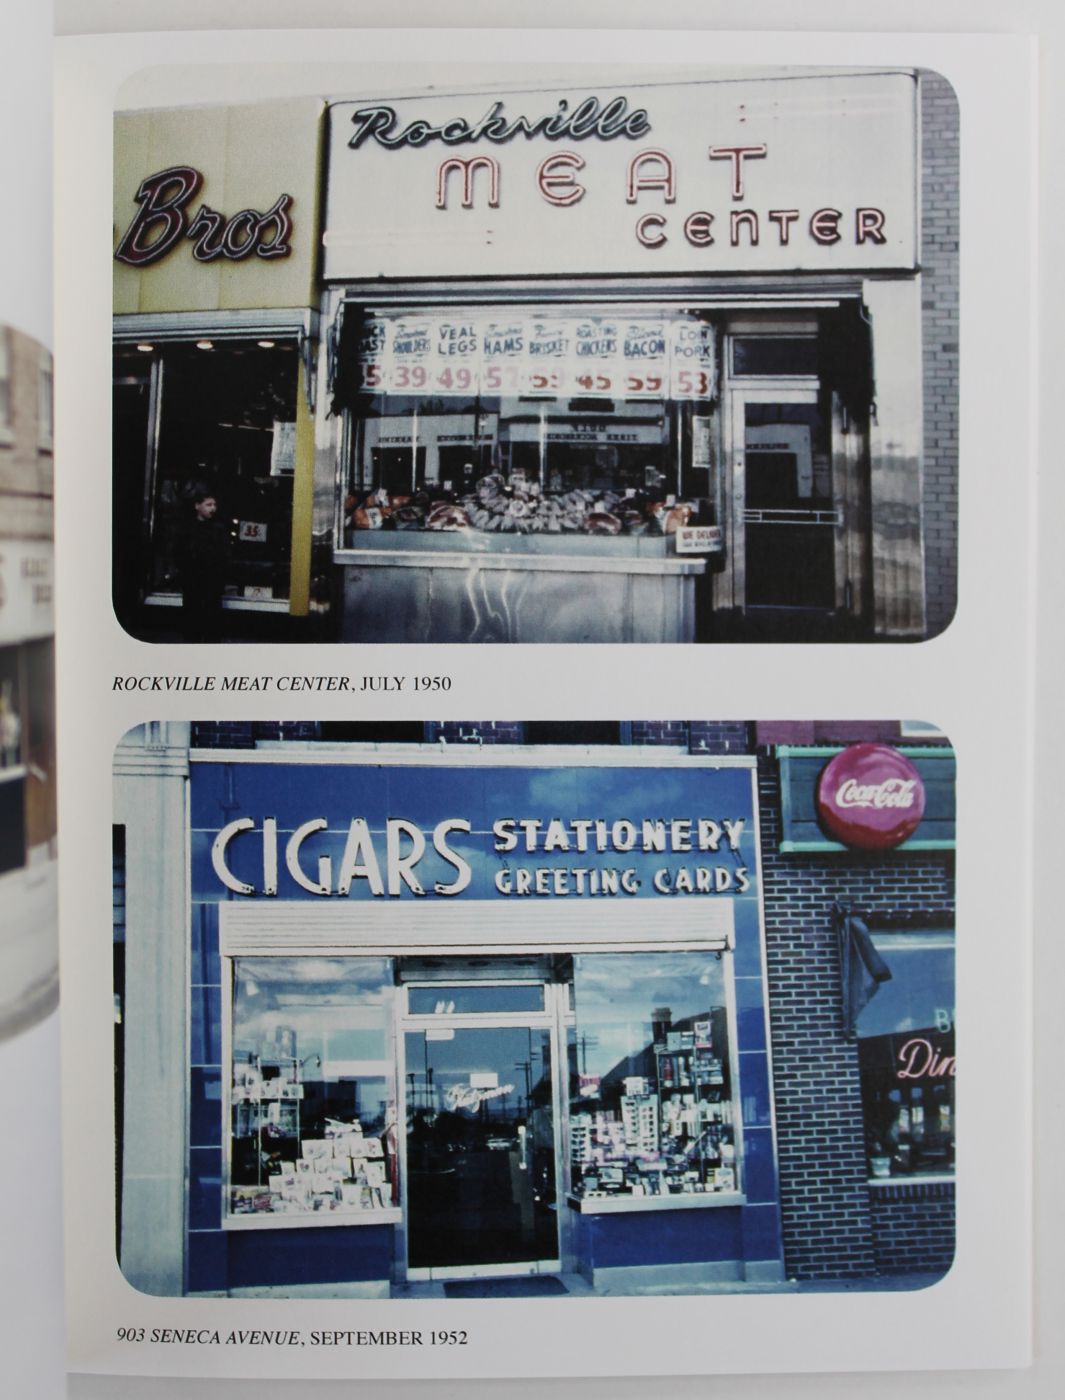 VARIOUS NEW YORK STORE FRONTS -  image 4